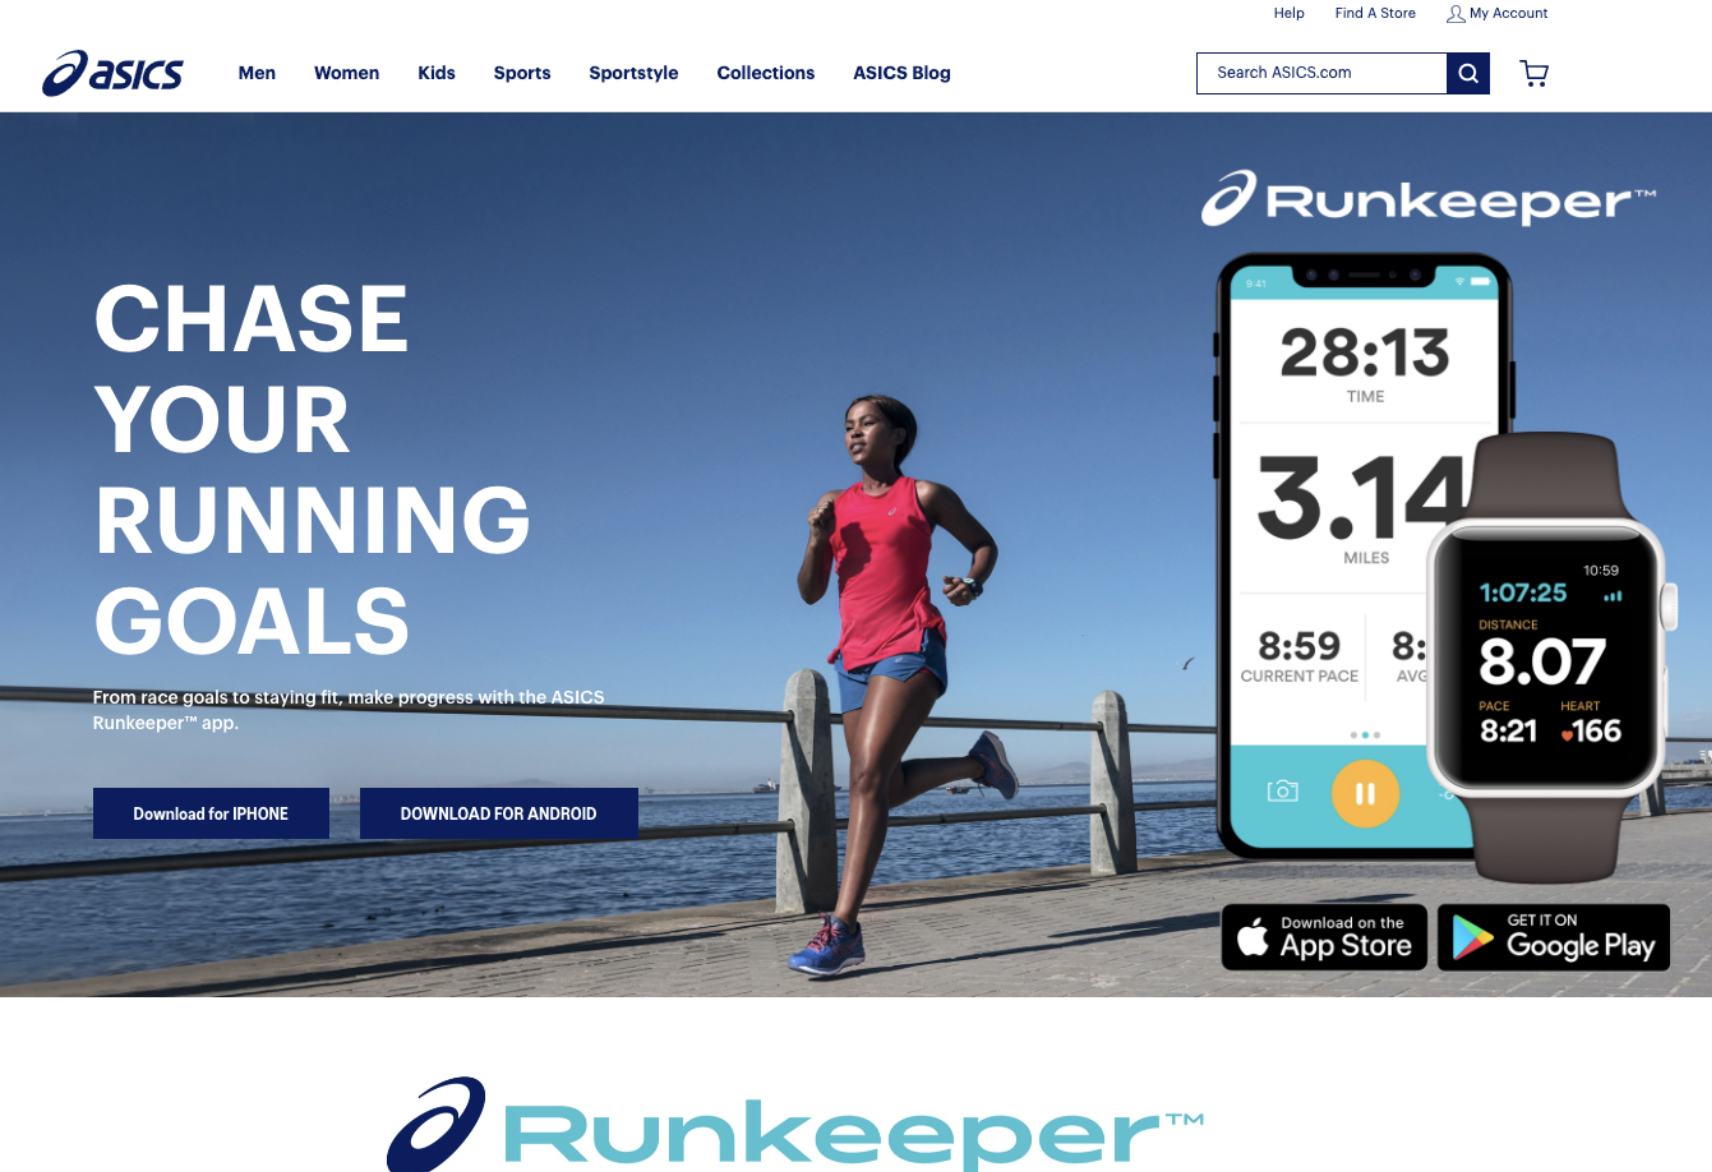 Asics homepage featuring the Runkeeper App